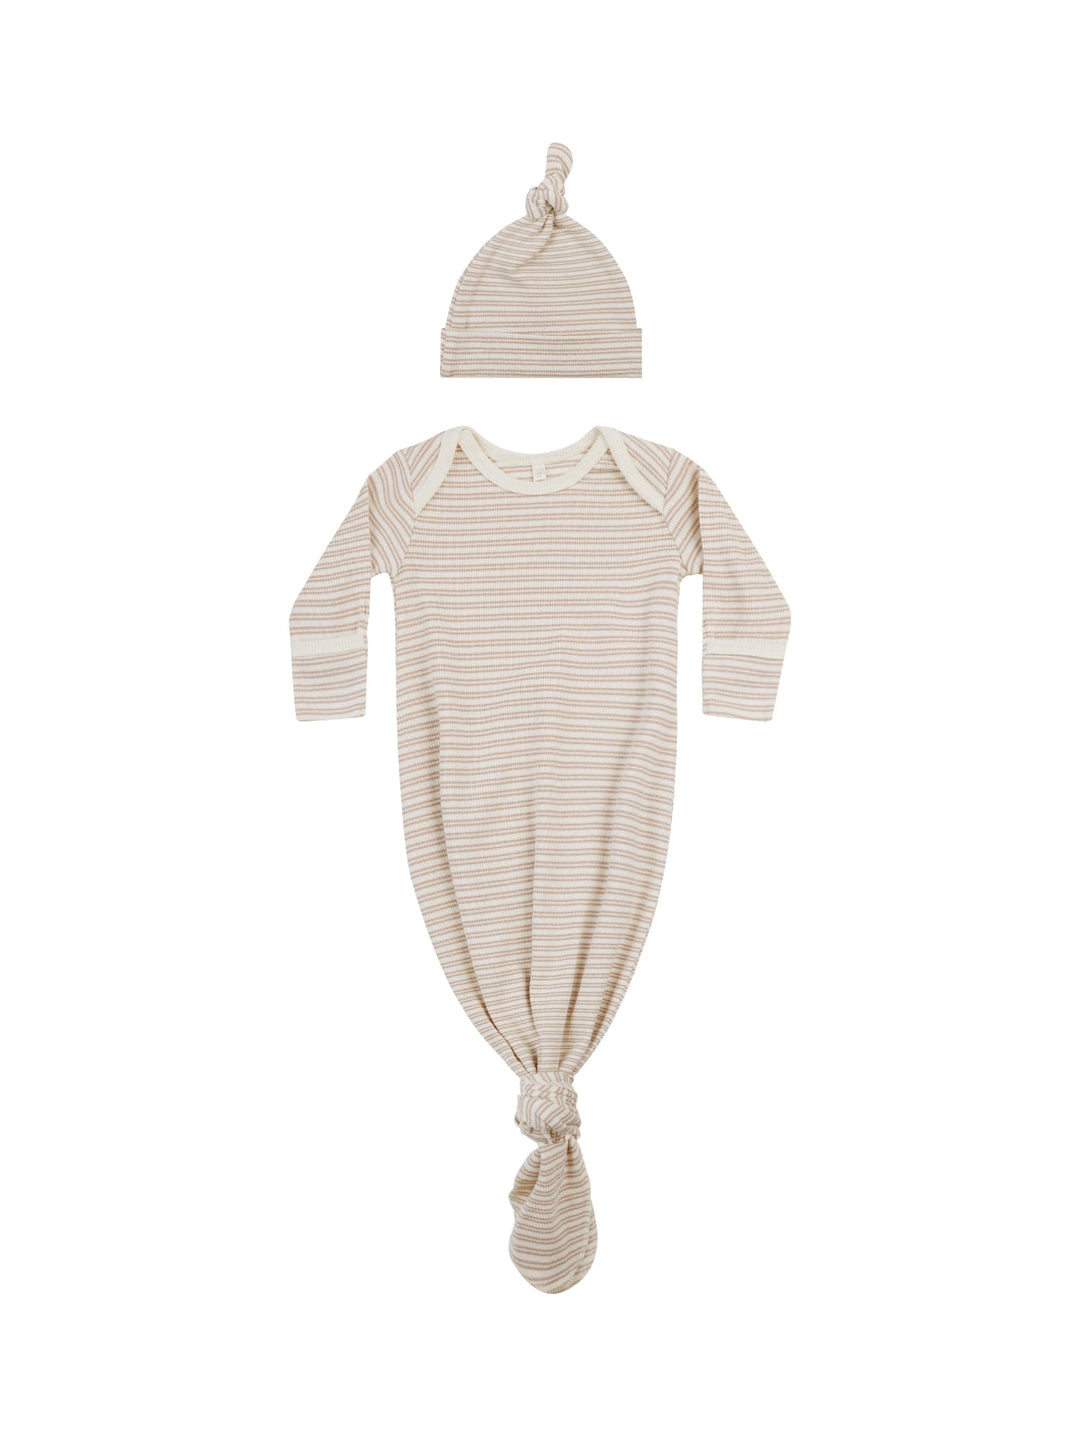 Quincy Mae knotted gown Knotted Baby Gown and Hat Set - Oat Stripe